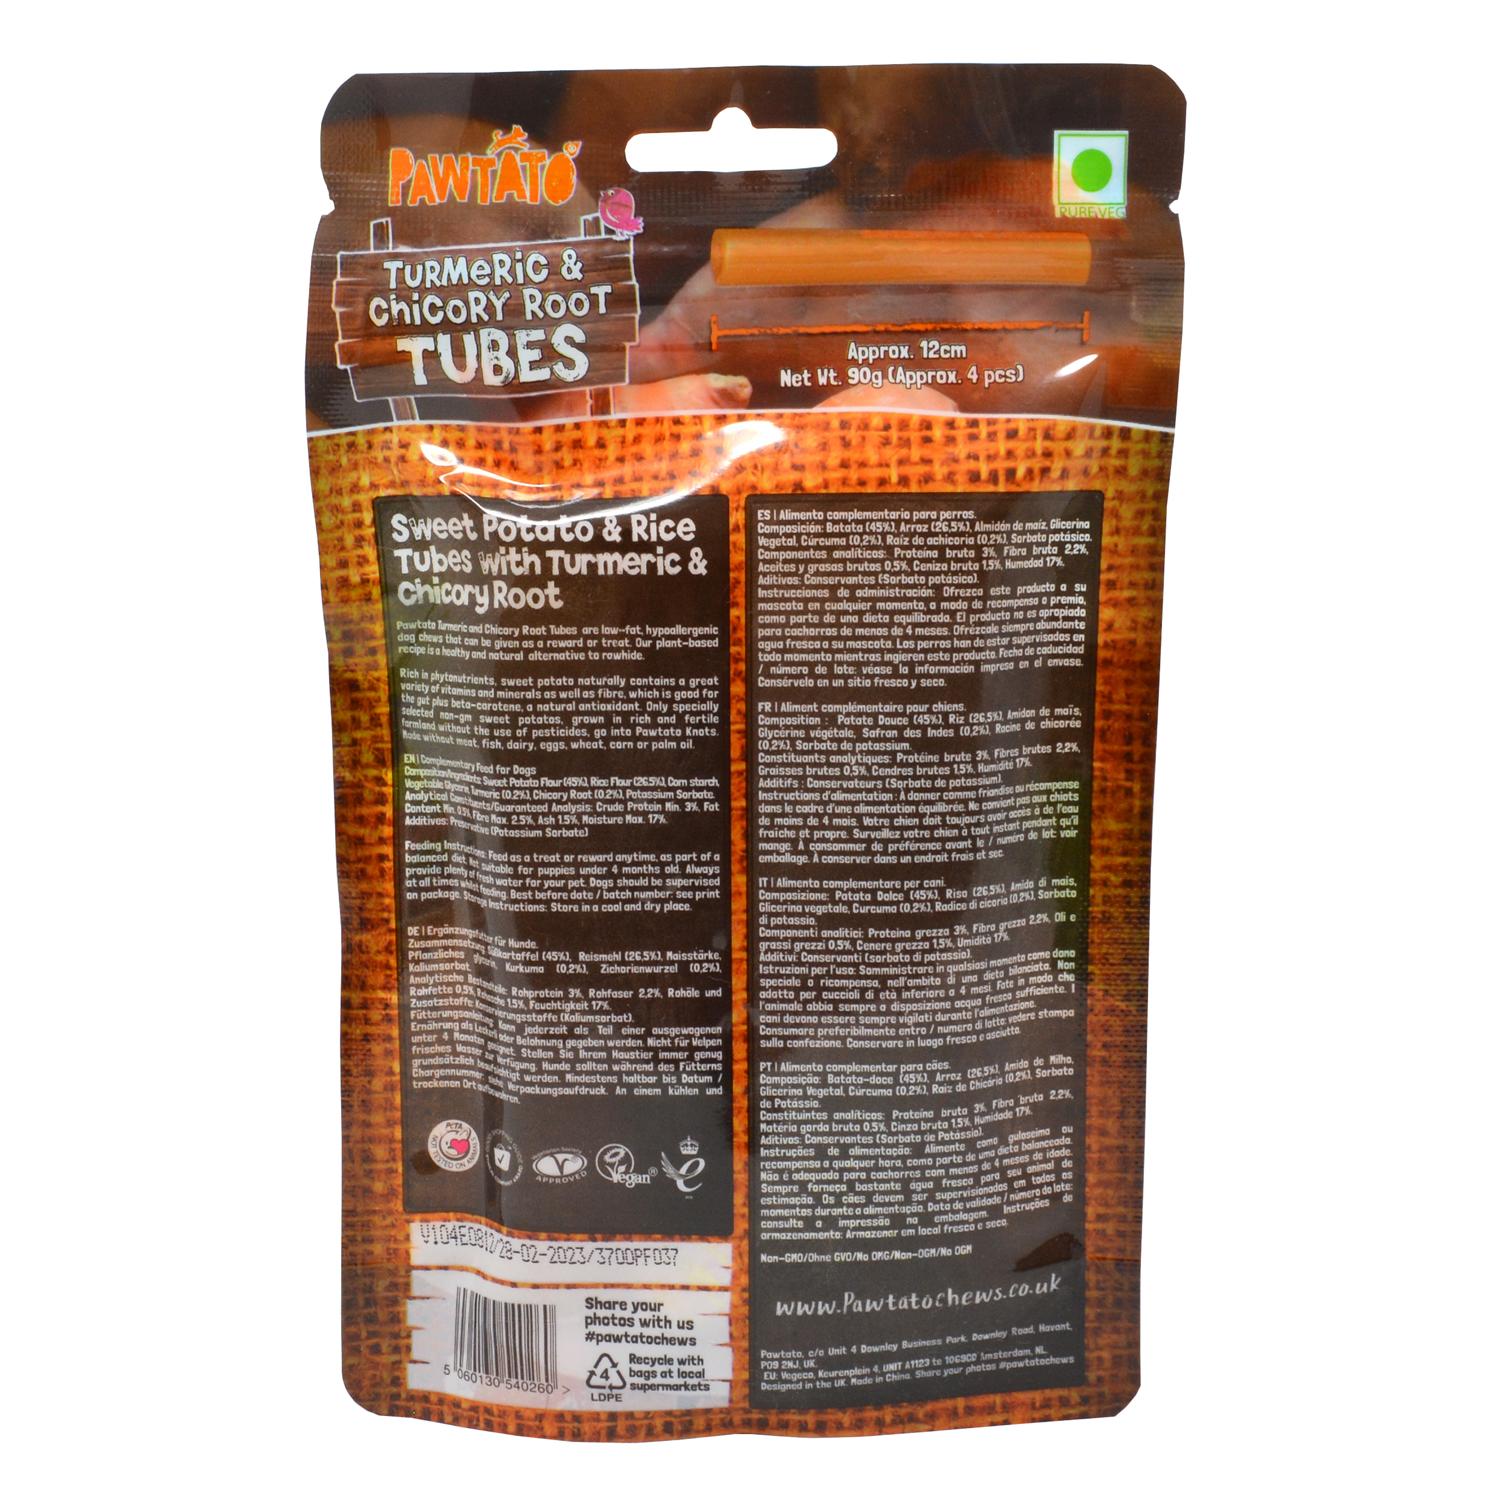 Back of a pack of Pawtato vegan turmeric and chicory root tubes dog chews